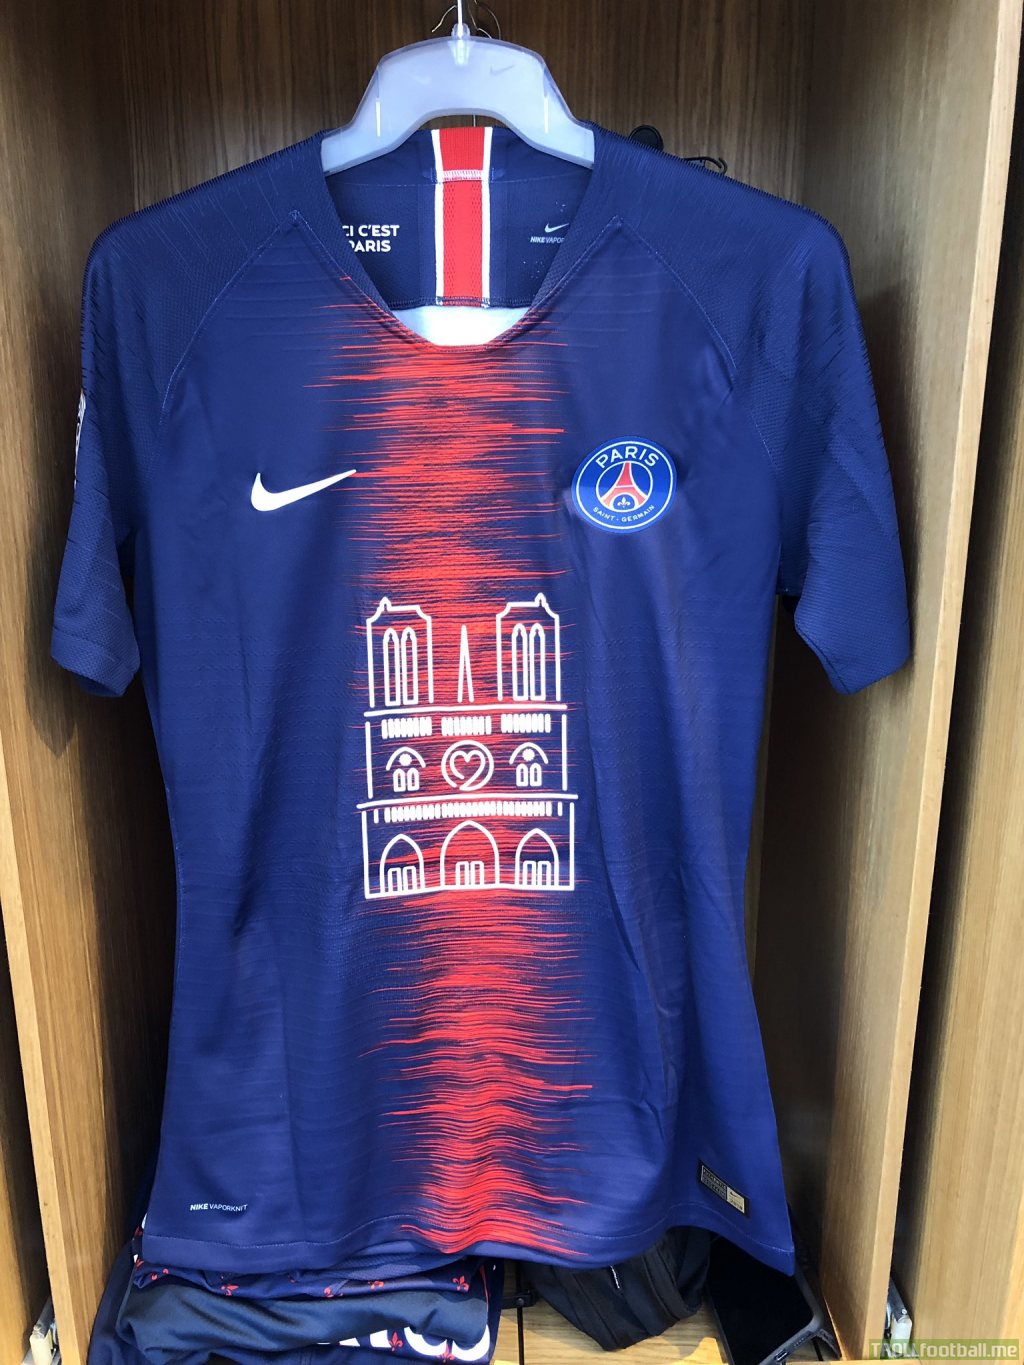 PSG will play in a special Notre-Dame kit tonight. Will also have "Notre-Dame" instead of the players name on the back